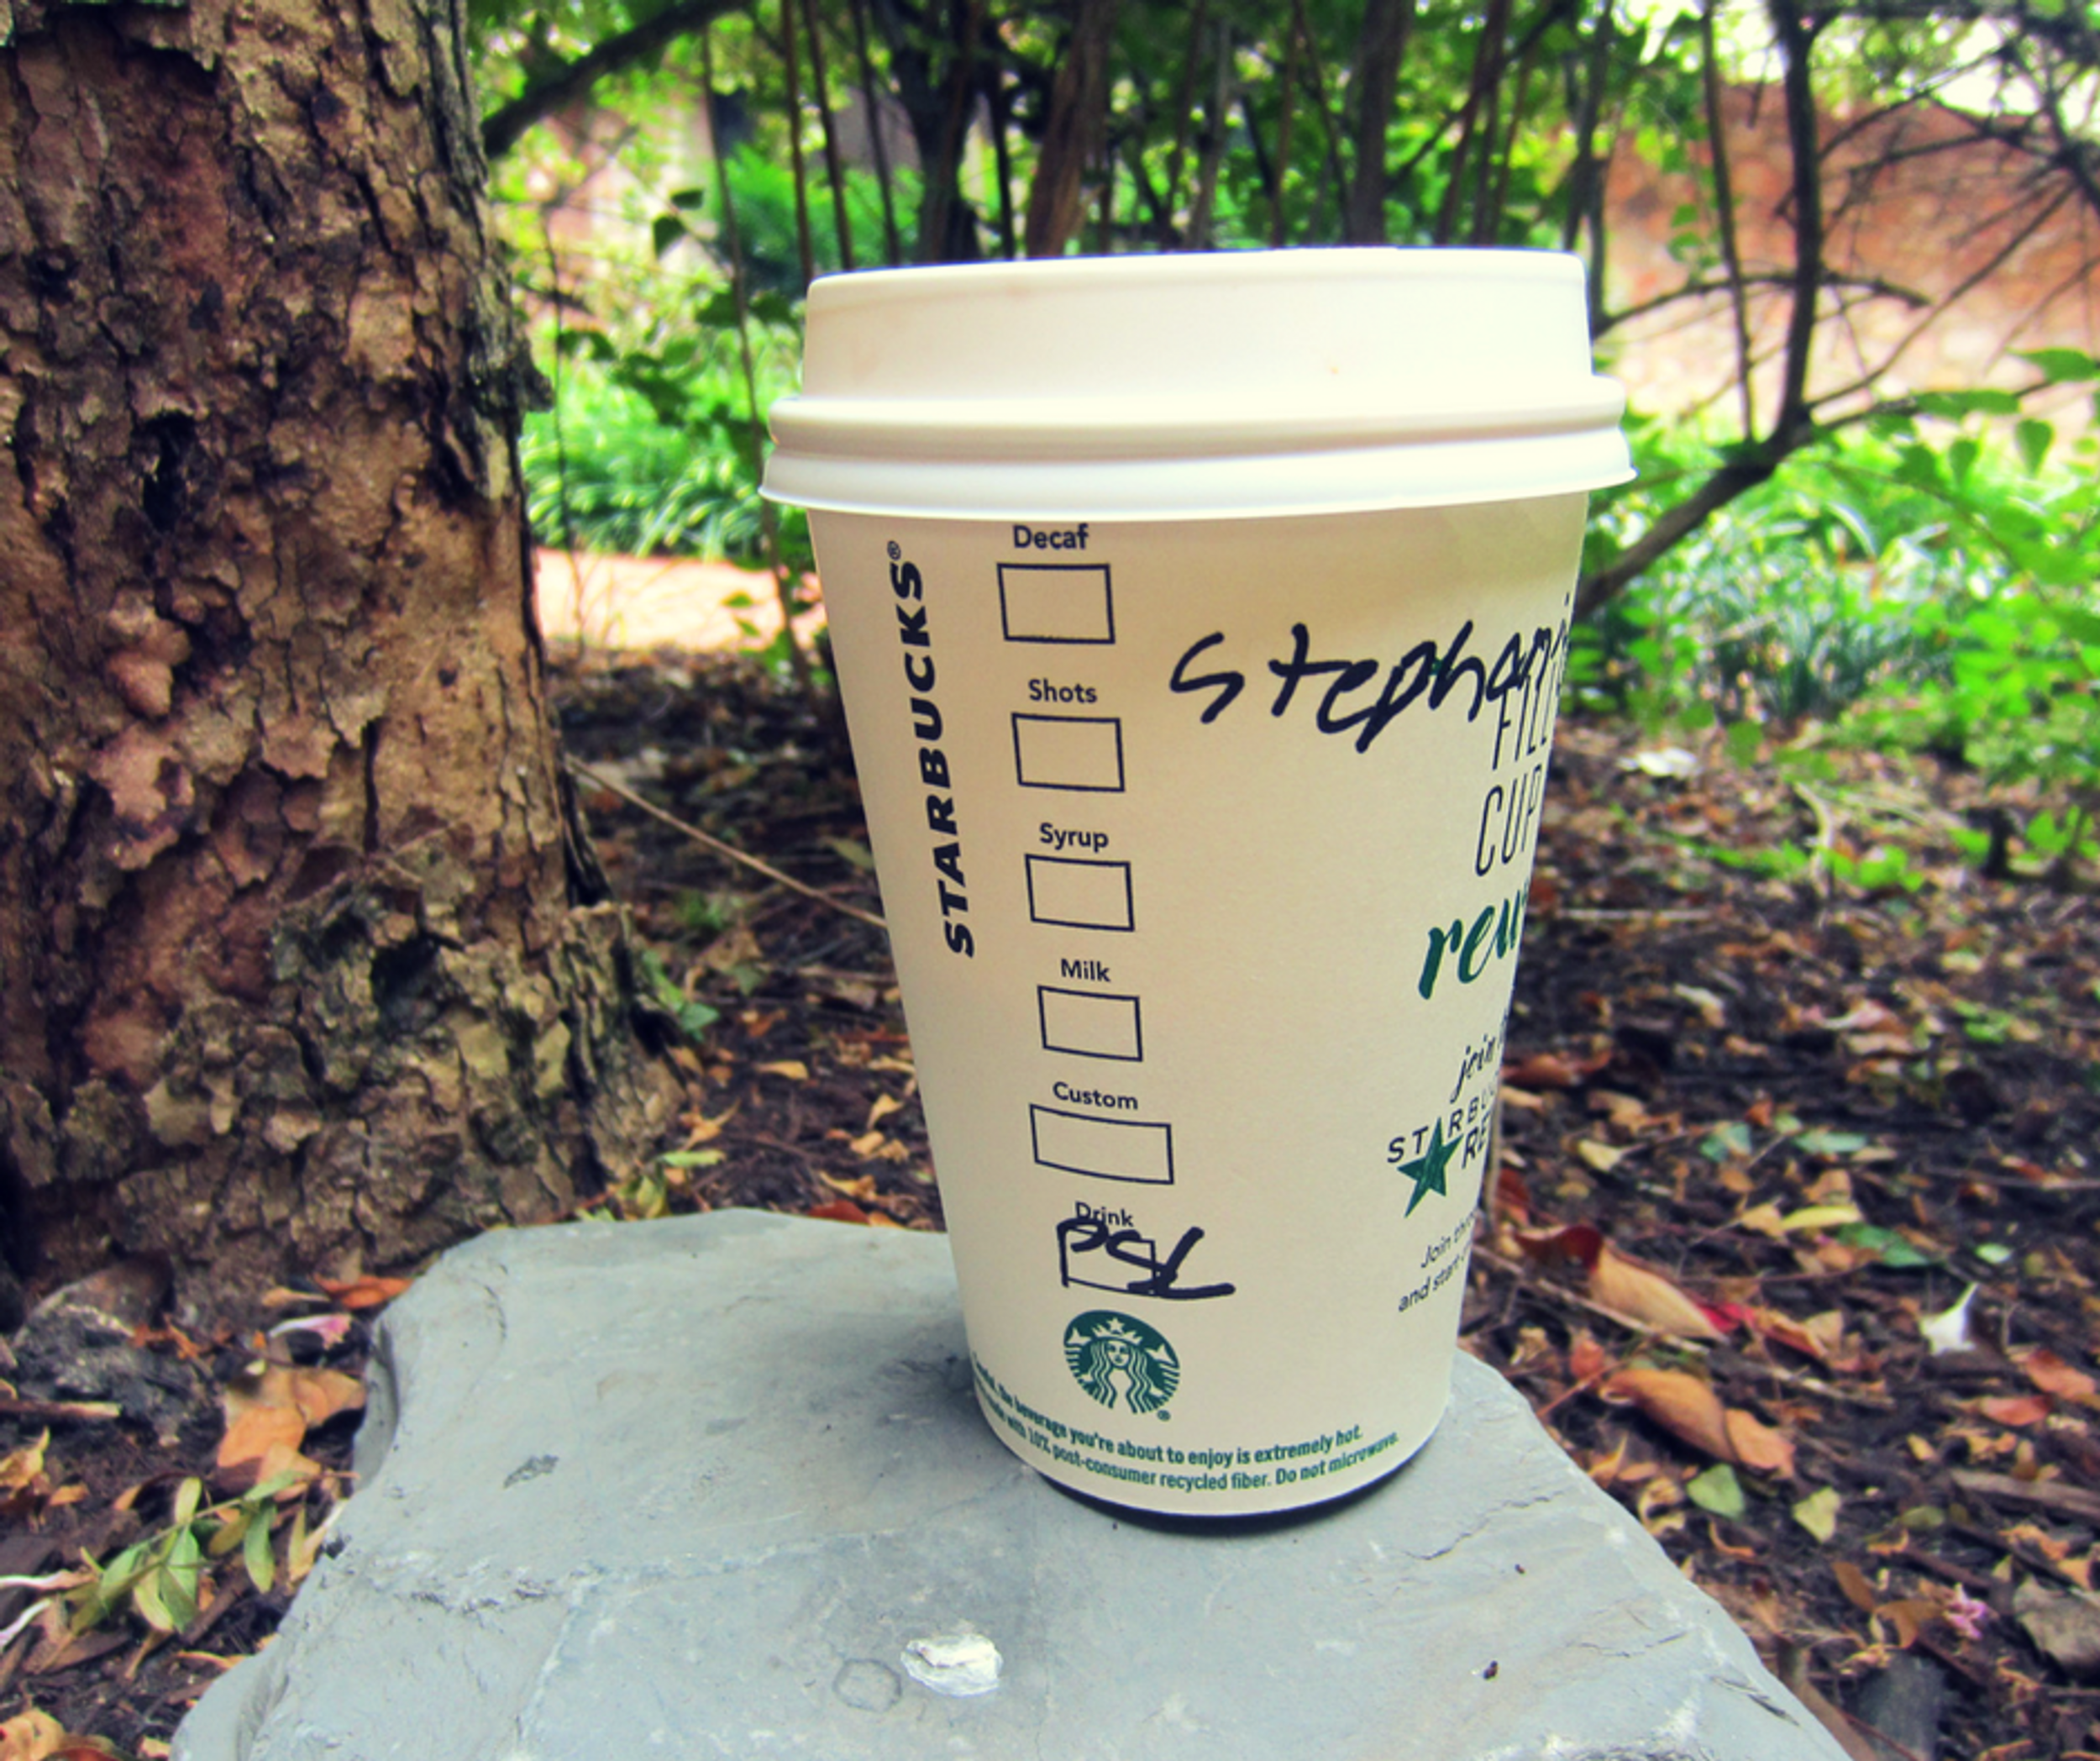 Why The PSL Is A Perfect Metaphor For Life